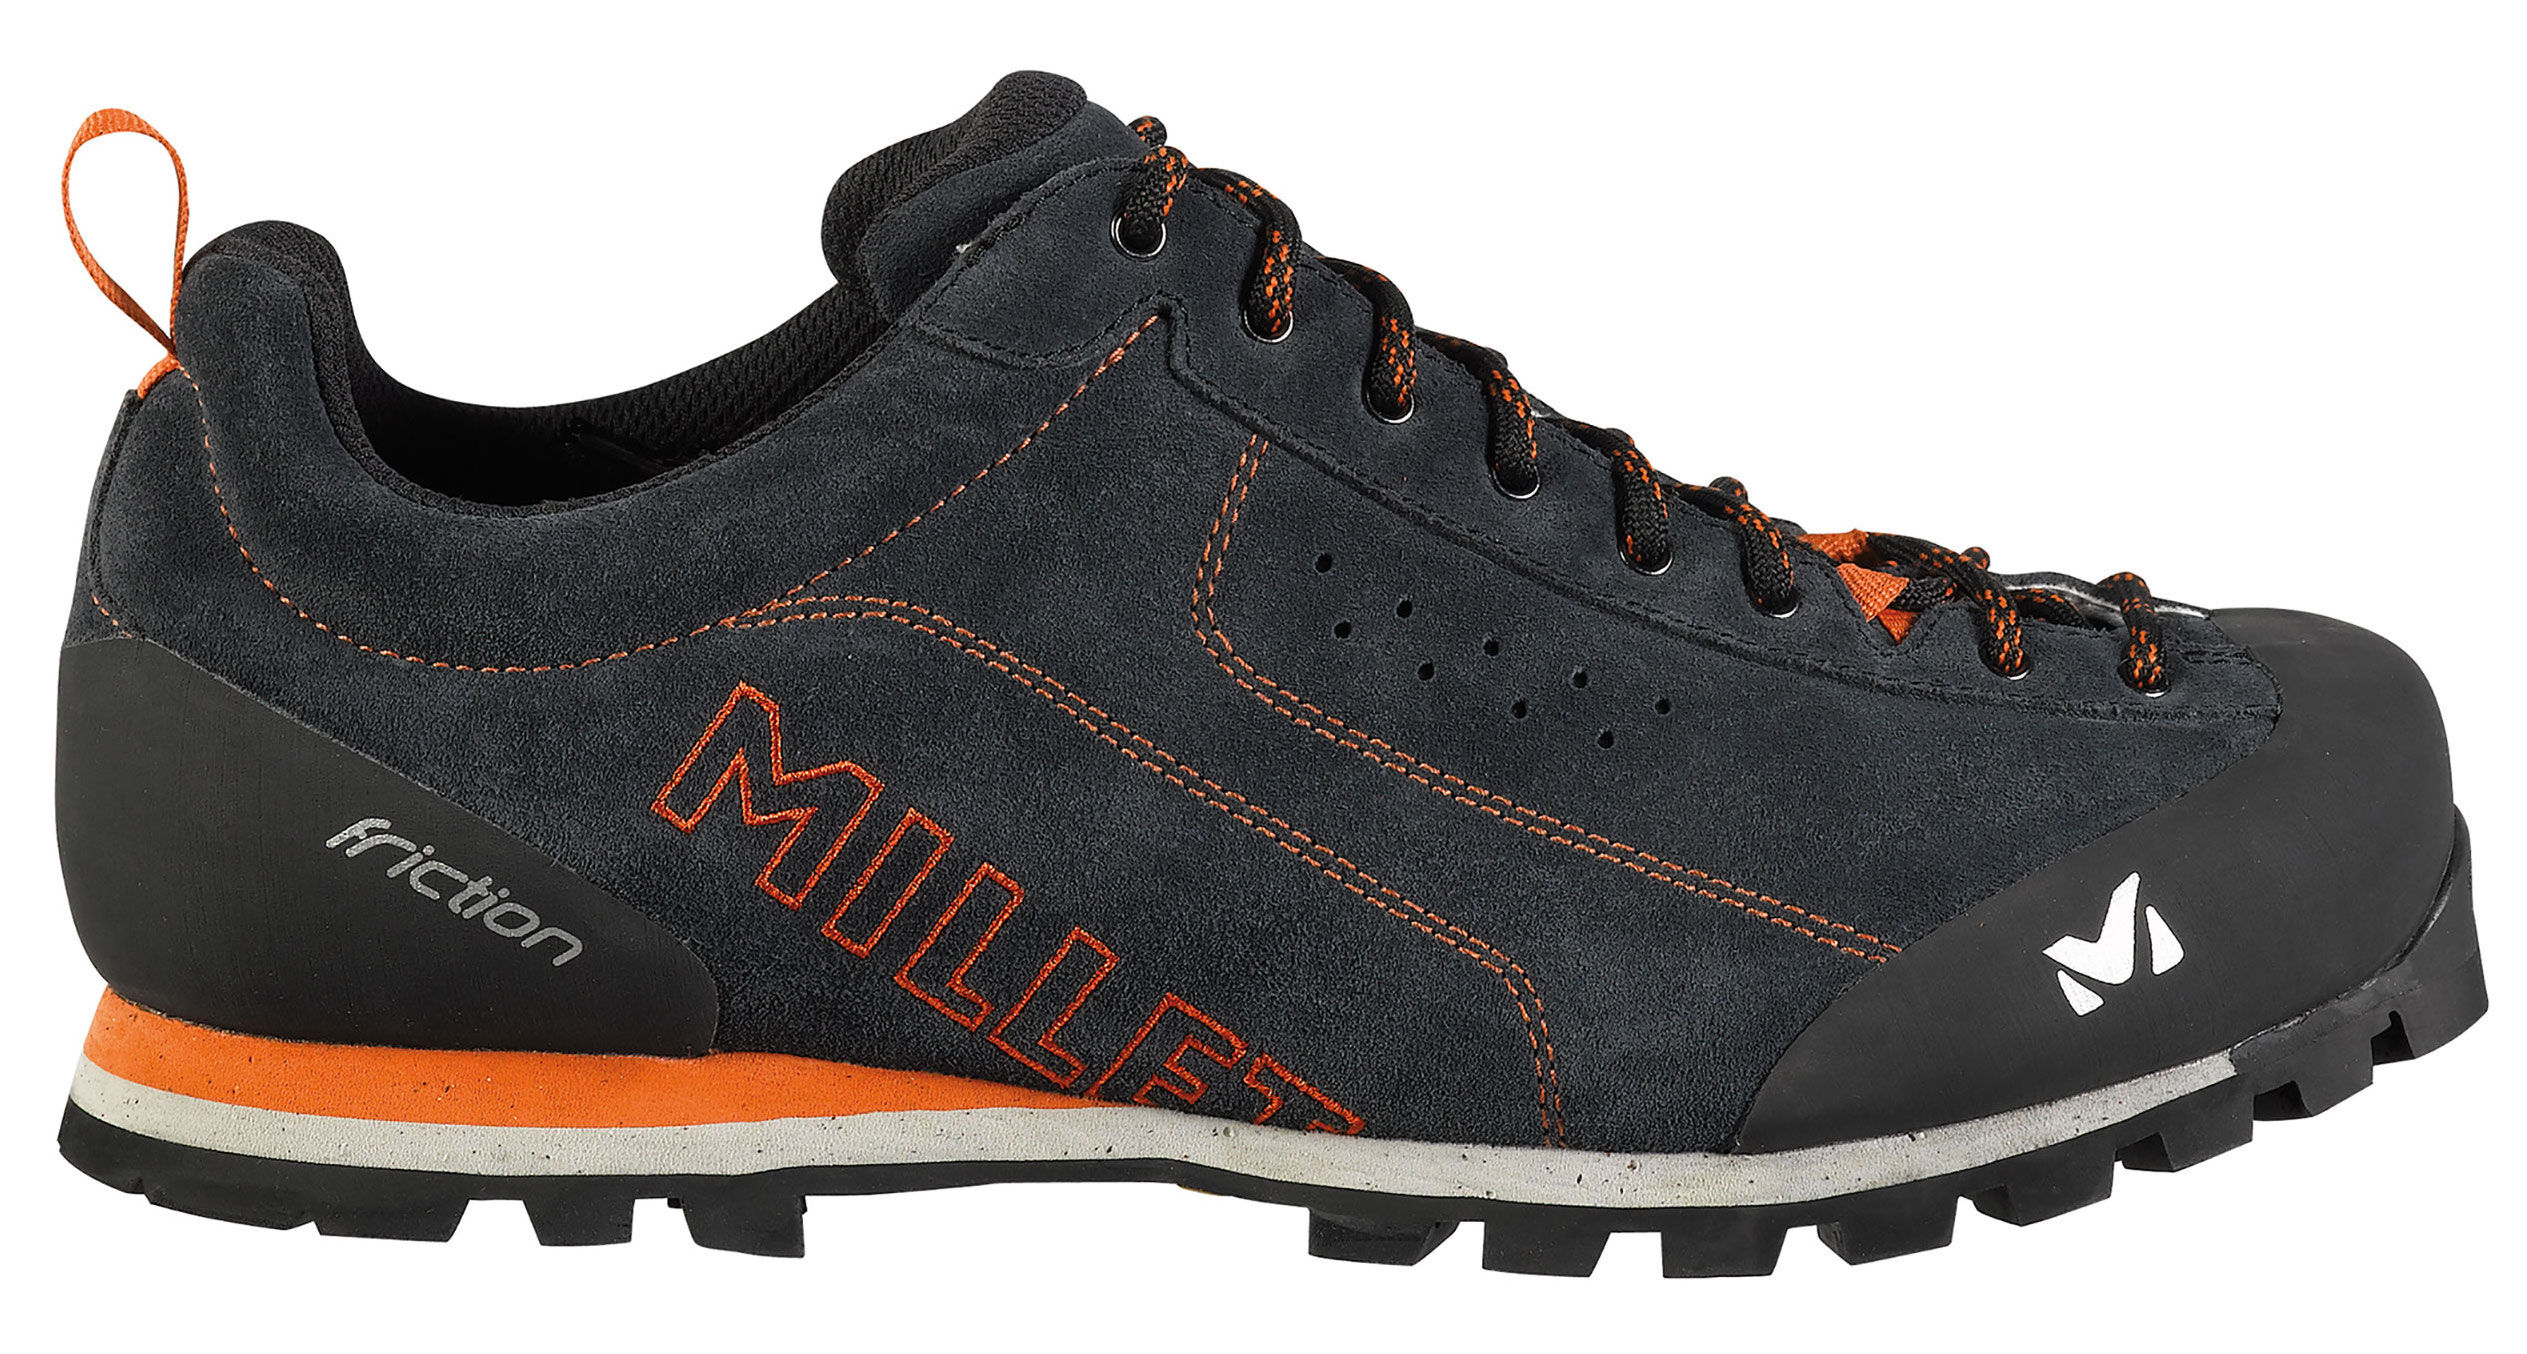 Millet - Friction - Approach shoes